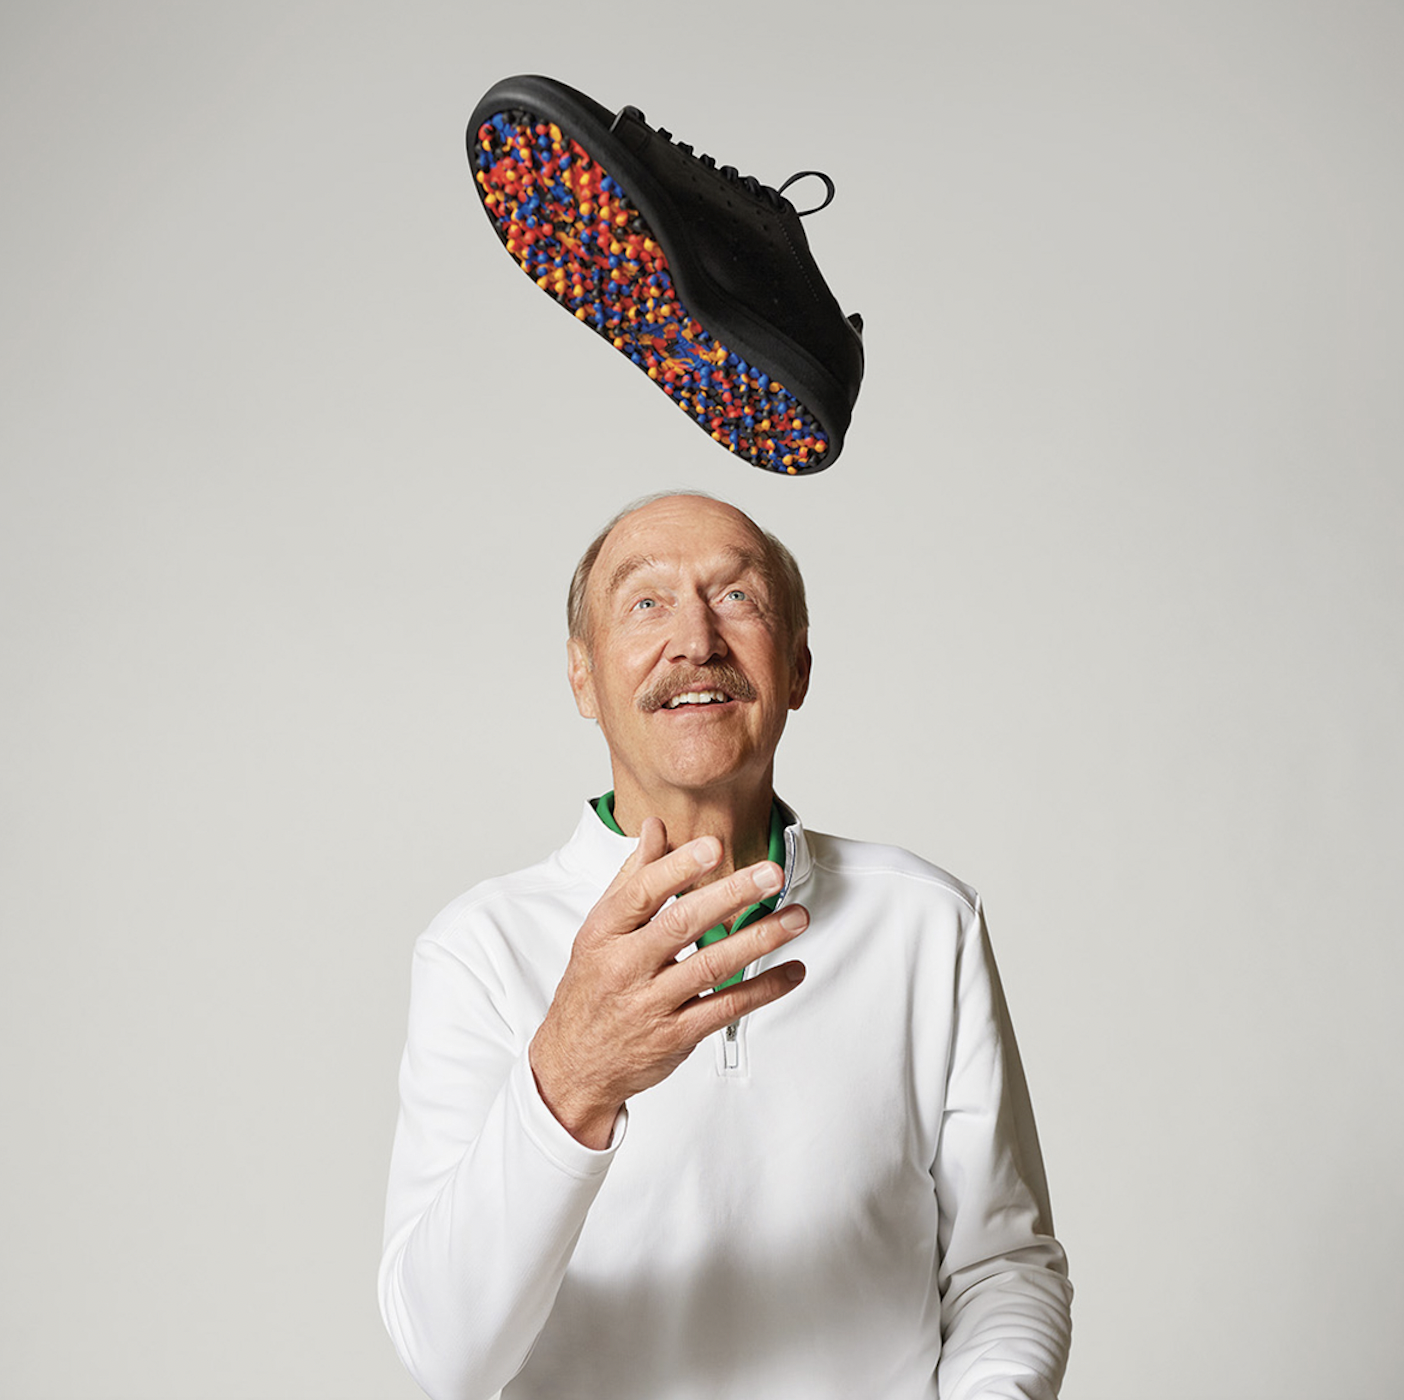 Adidas launches limited-edition Stan Smith golf shoe to celebrate